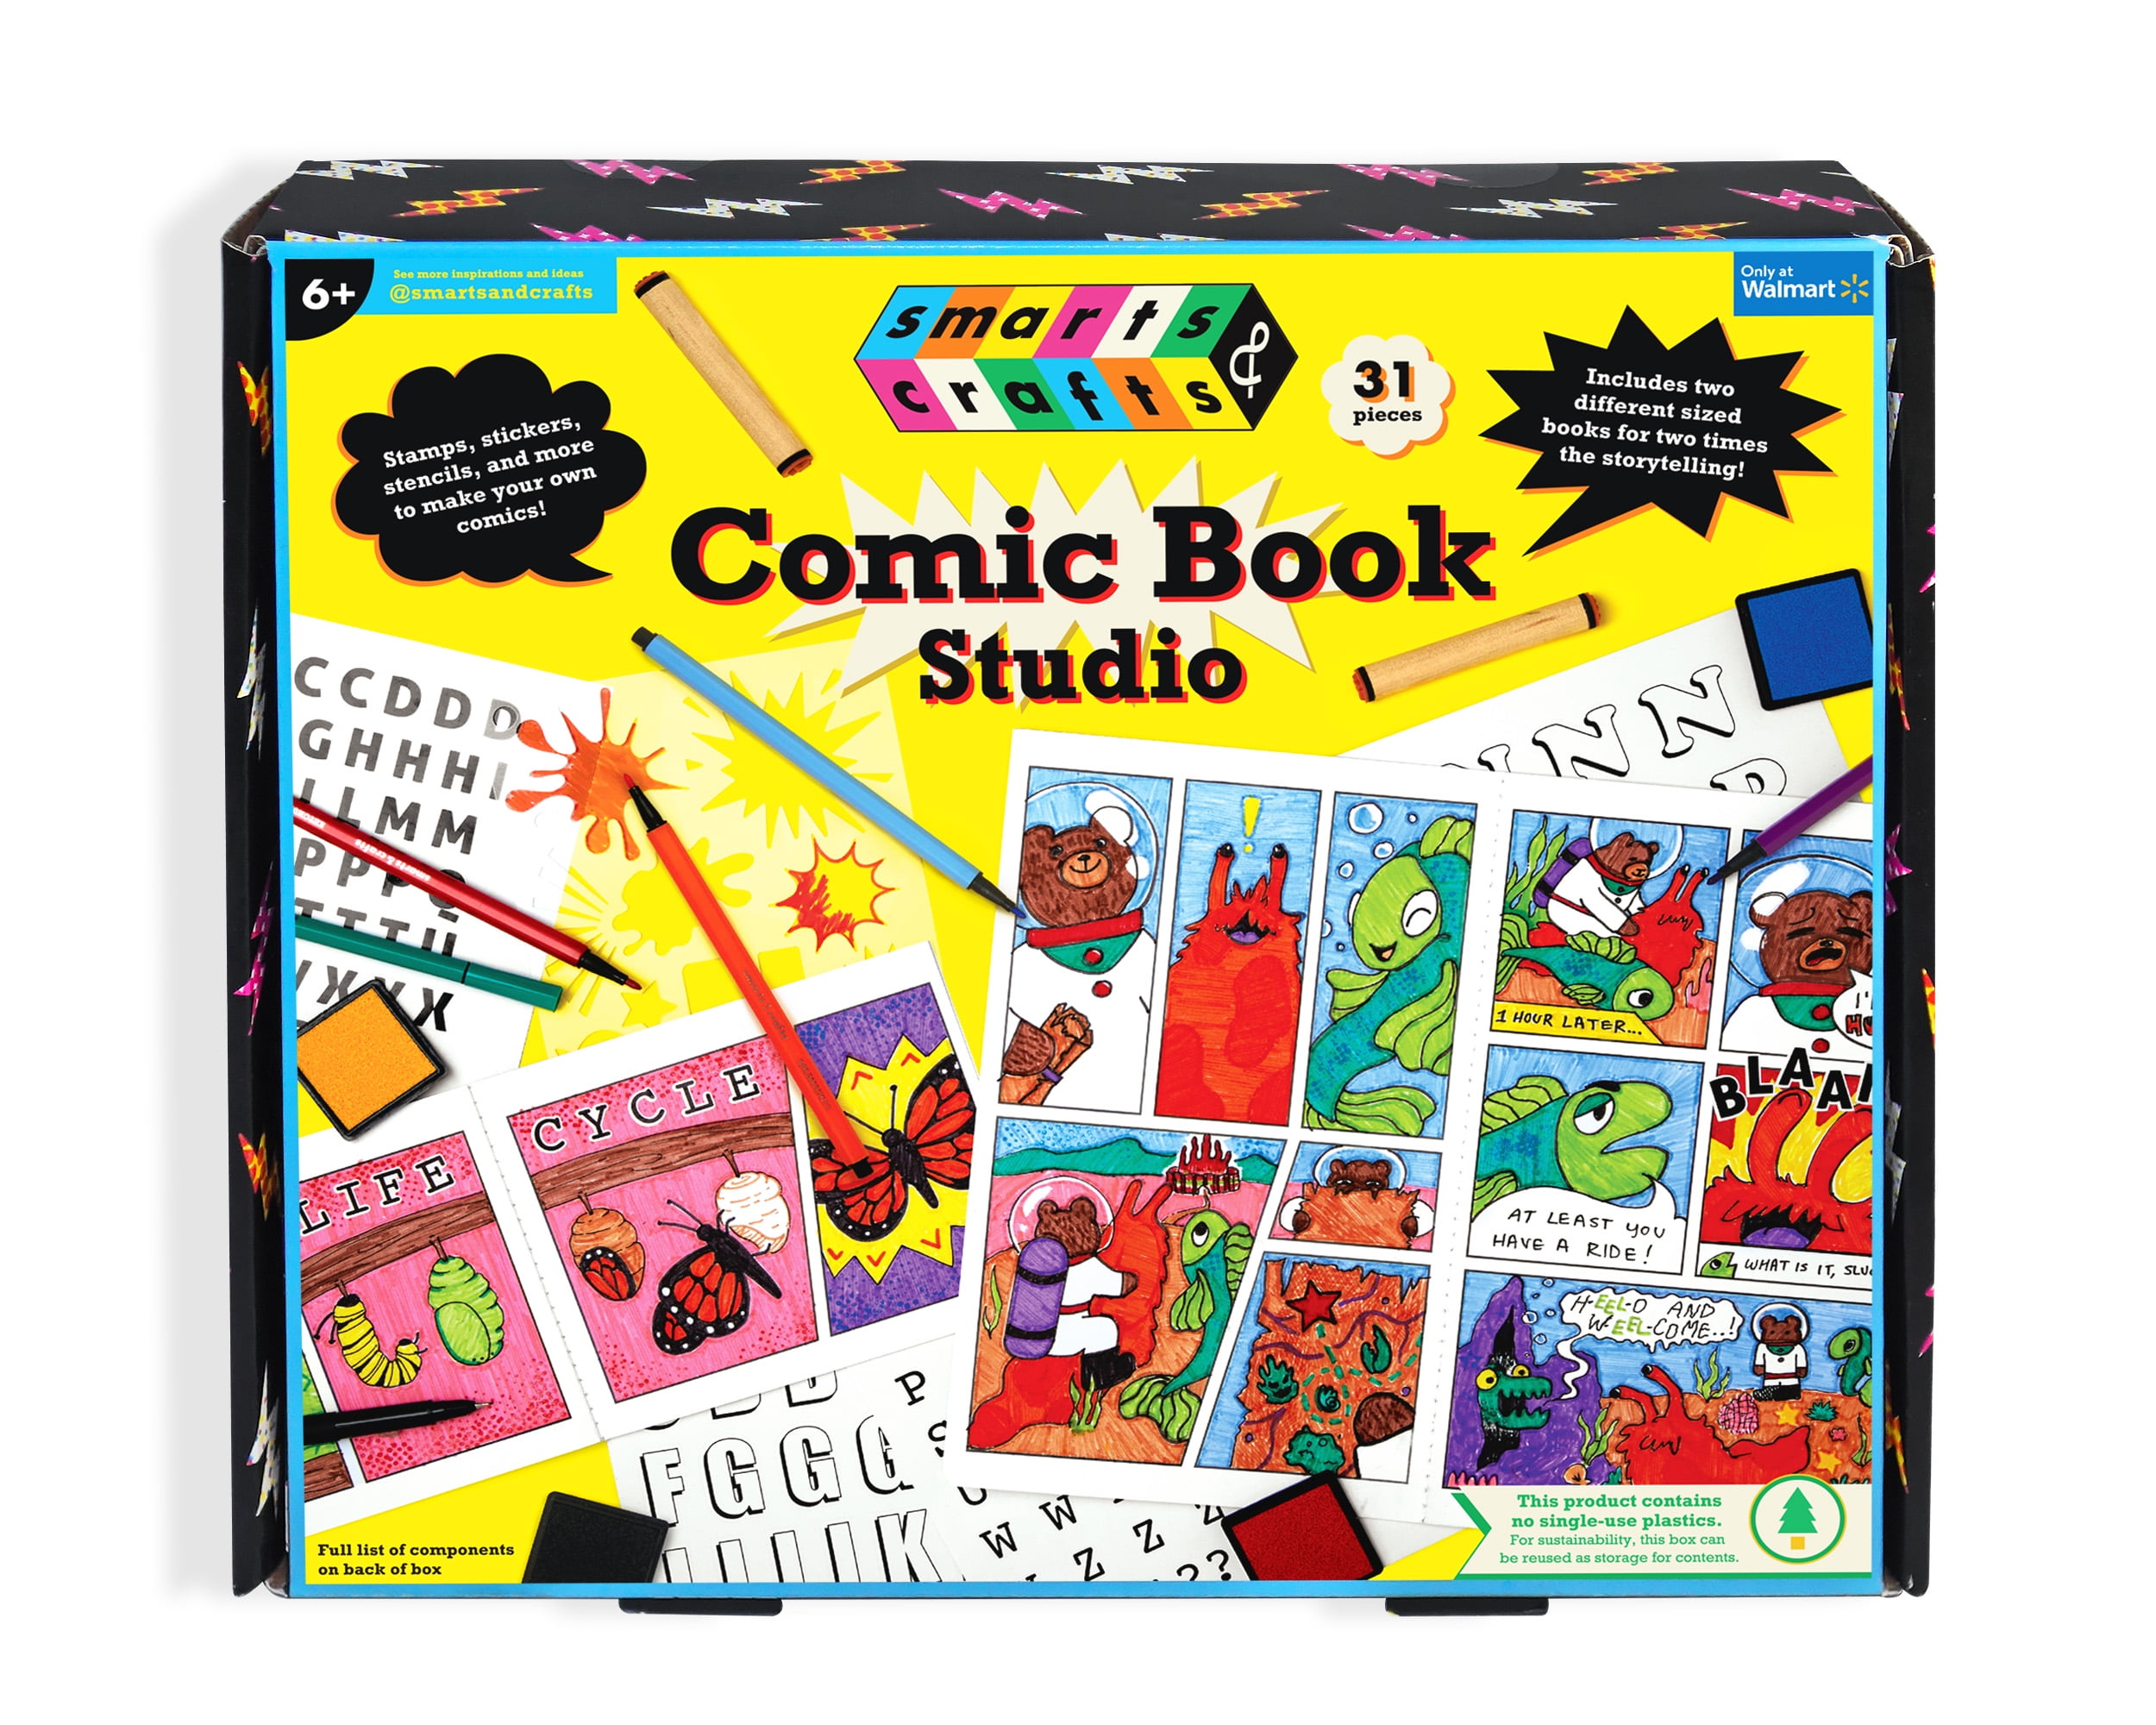 Smarts & Crafts Comic Book Studio, 31 Pieces, for Boys, Girls, Ages 6+ 